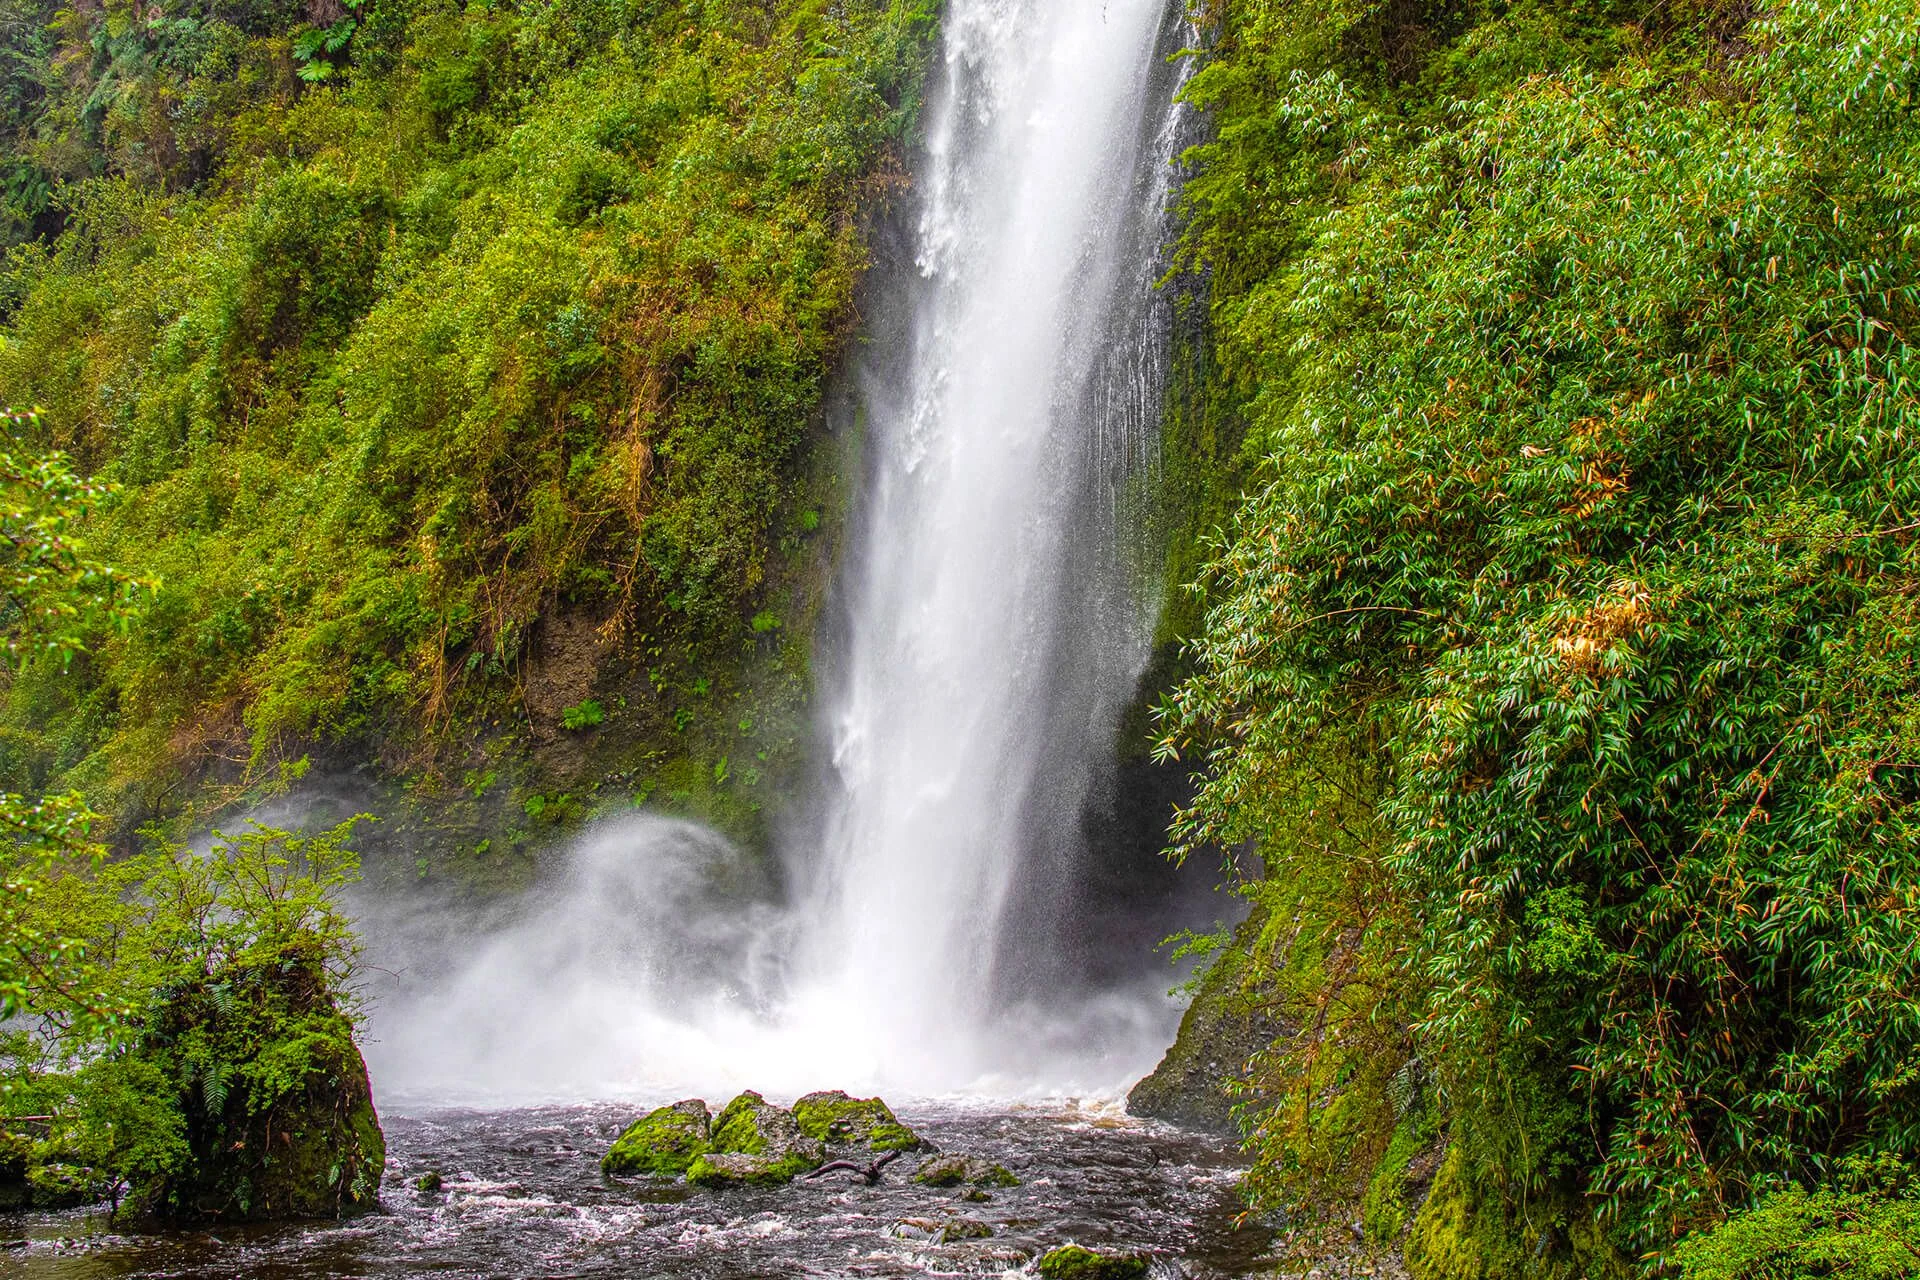 Waterfalls permeate every corner of Chiloé National Park.